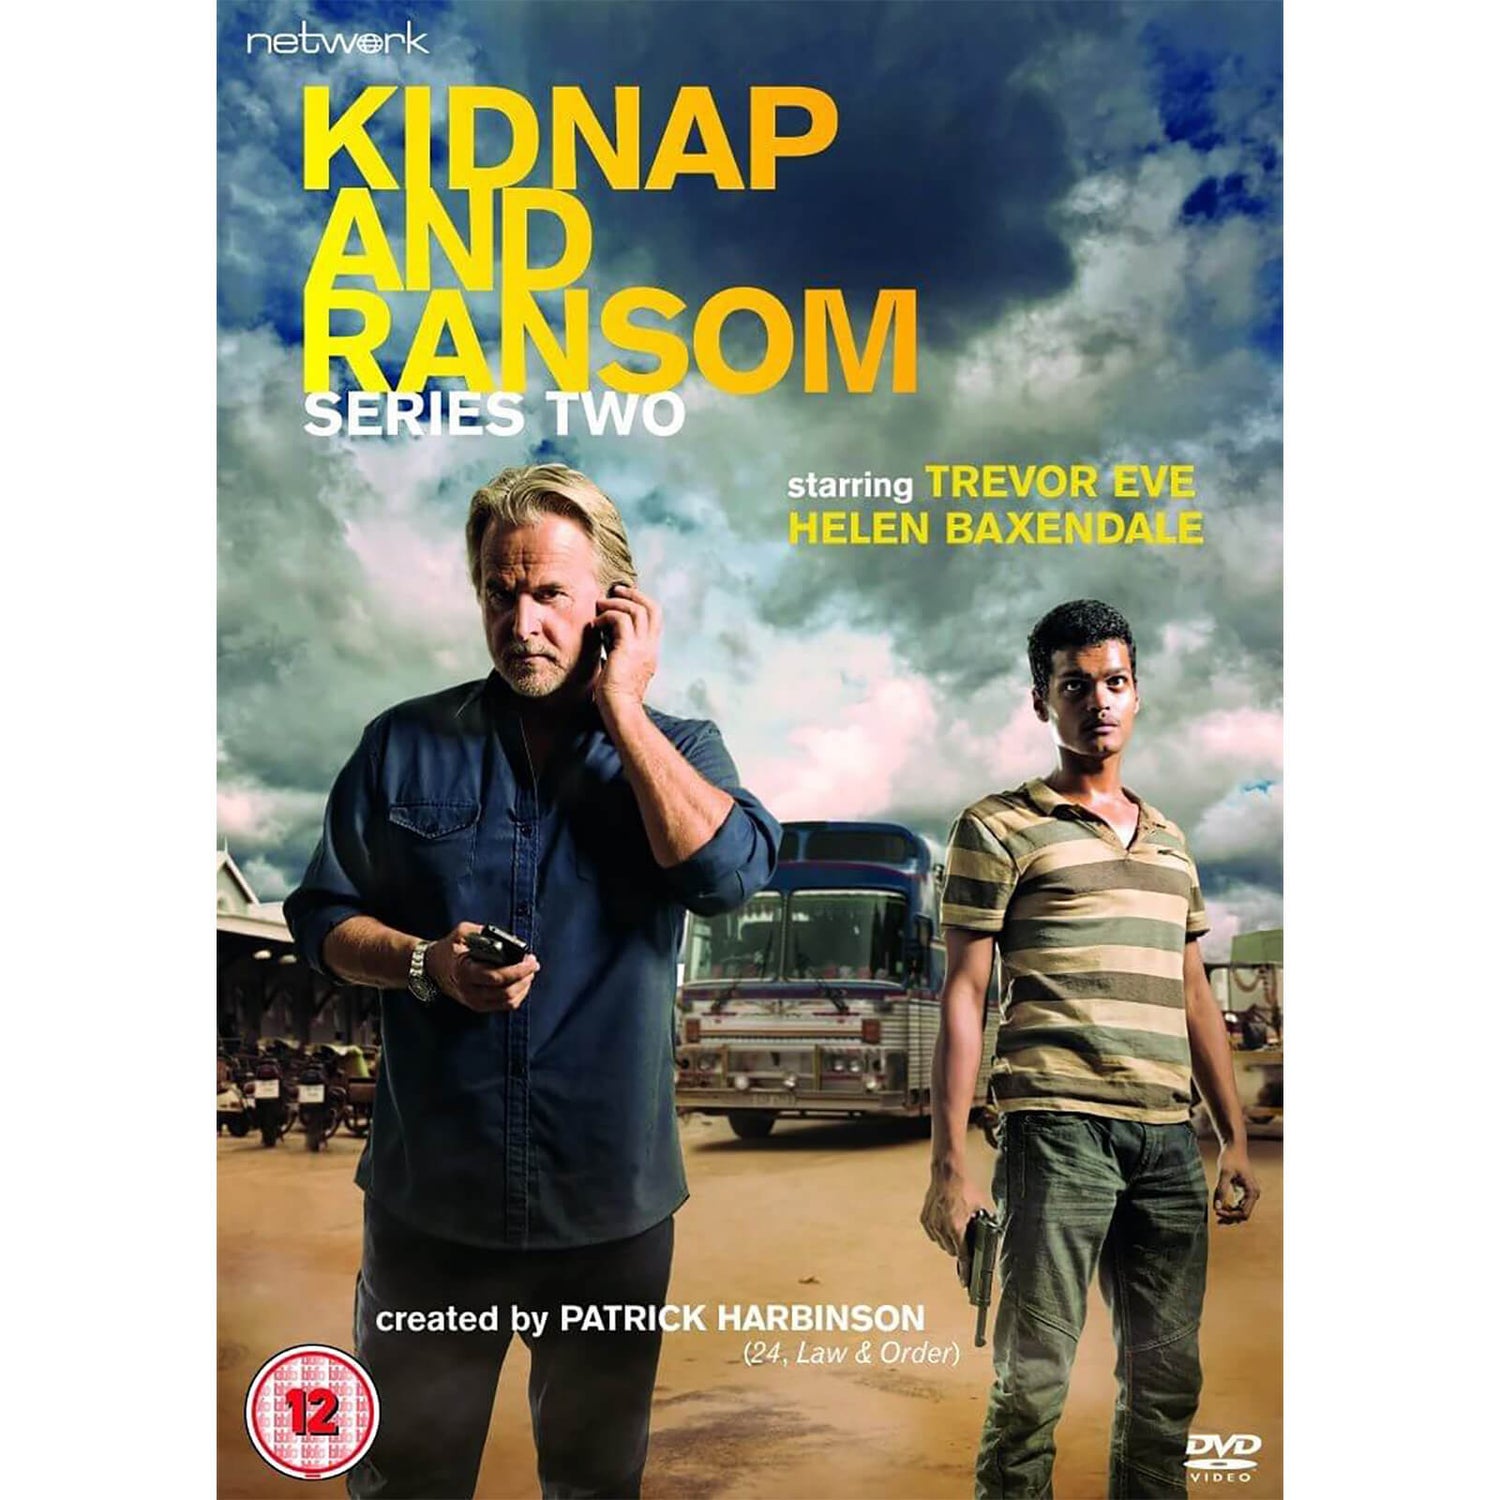 Kidnap and Ransom